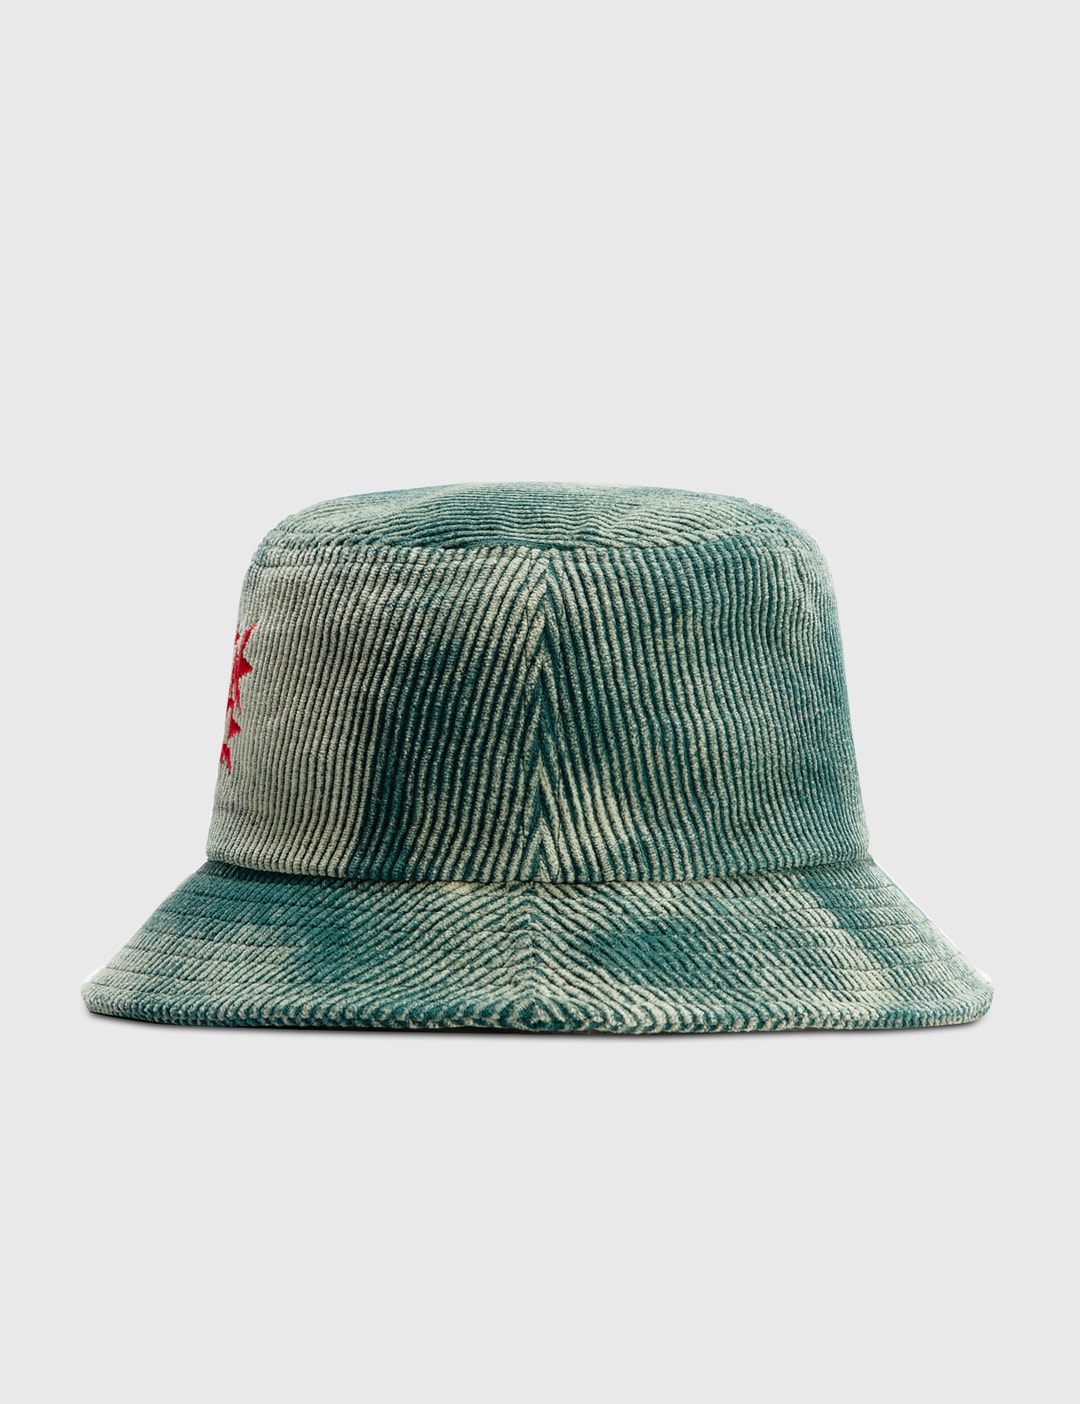 Brain Dead - Spikey Bleached Cord Bucket Hat | HBX - Globally Curated ...